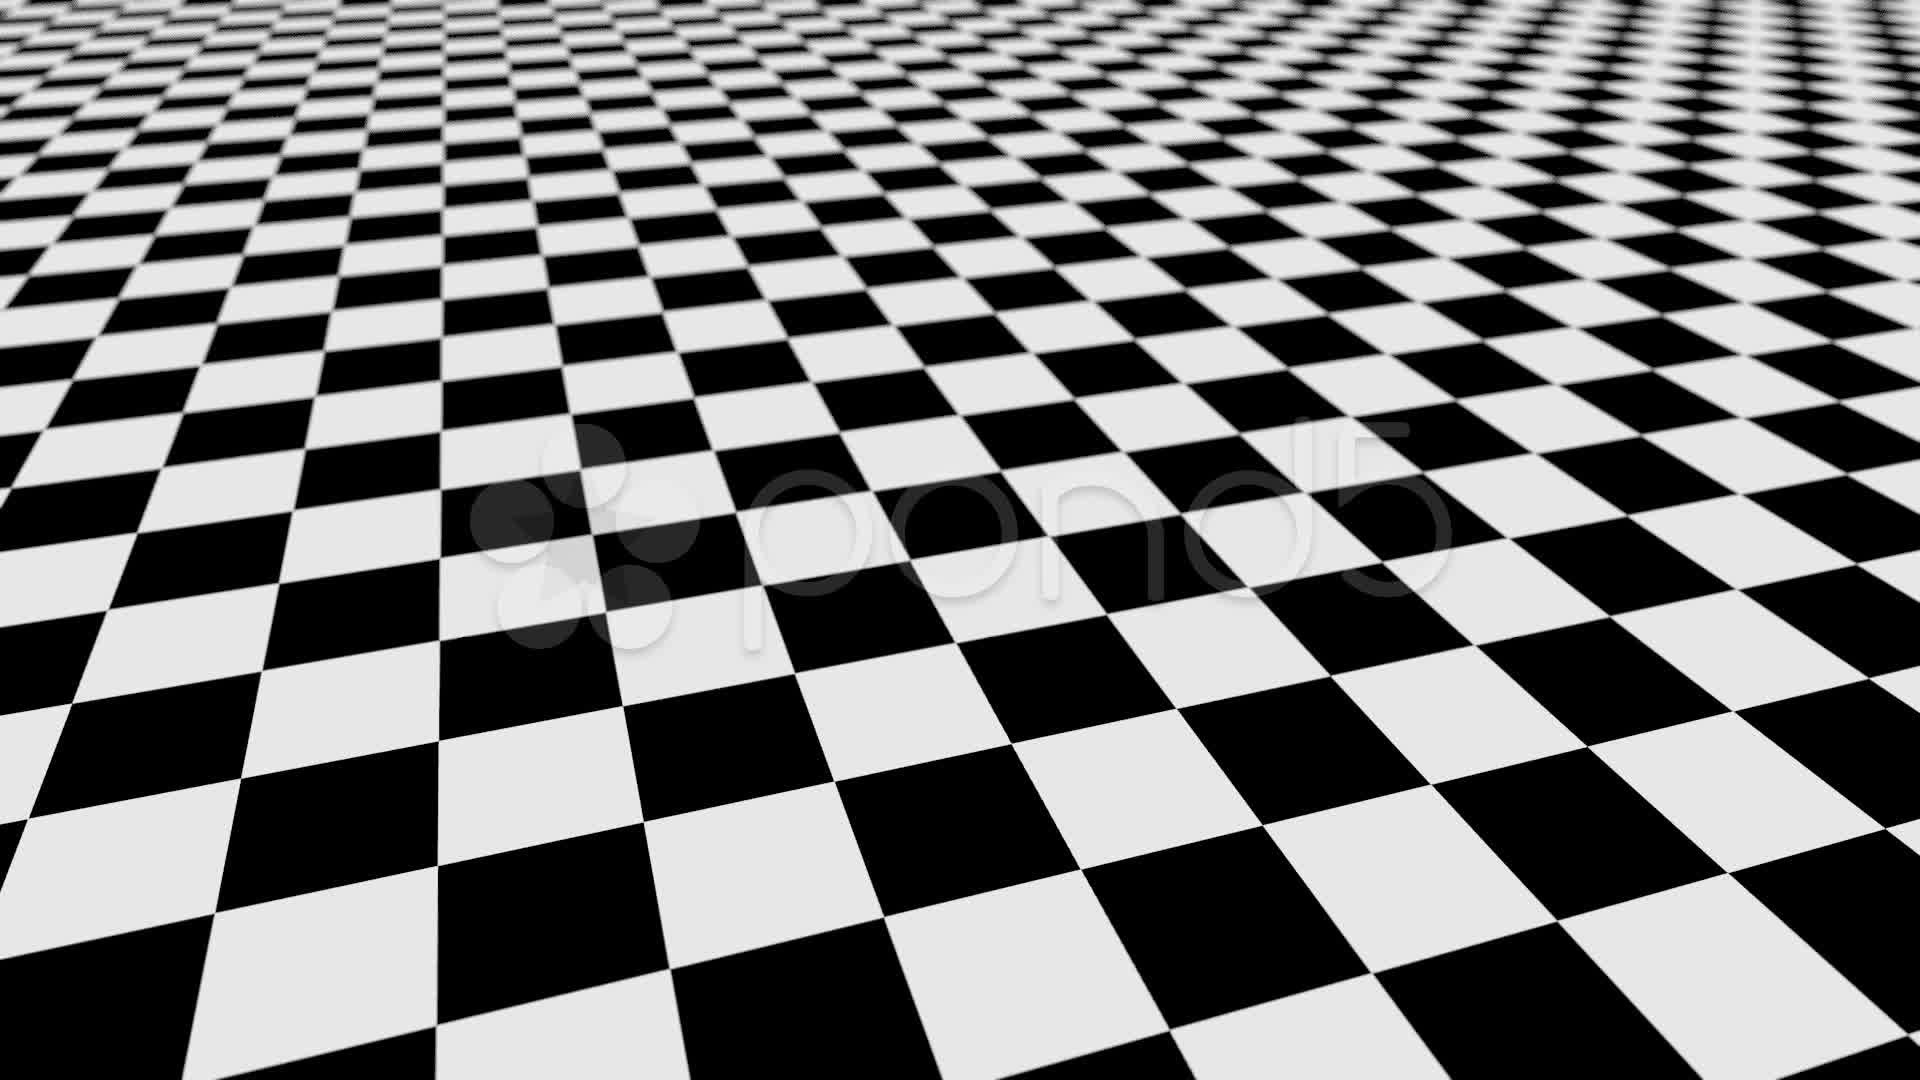 Black And White Checkerboard Wallpaper 47 Images HD Wallpapers Download Free Images Wallpaper [wallpaper981.blogspot.com]